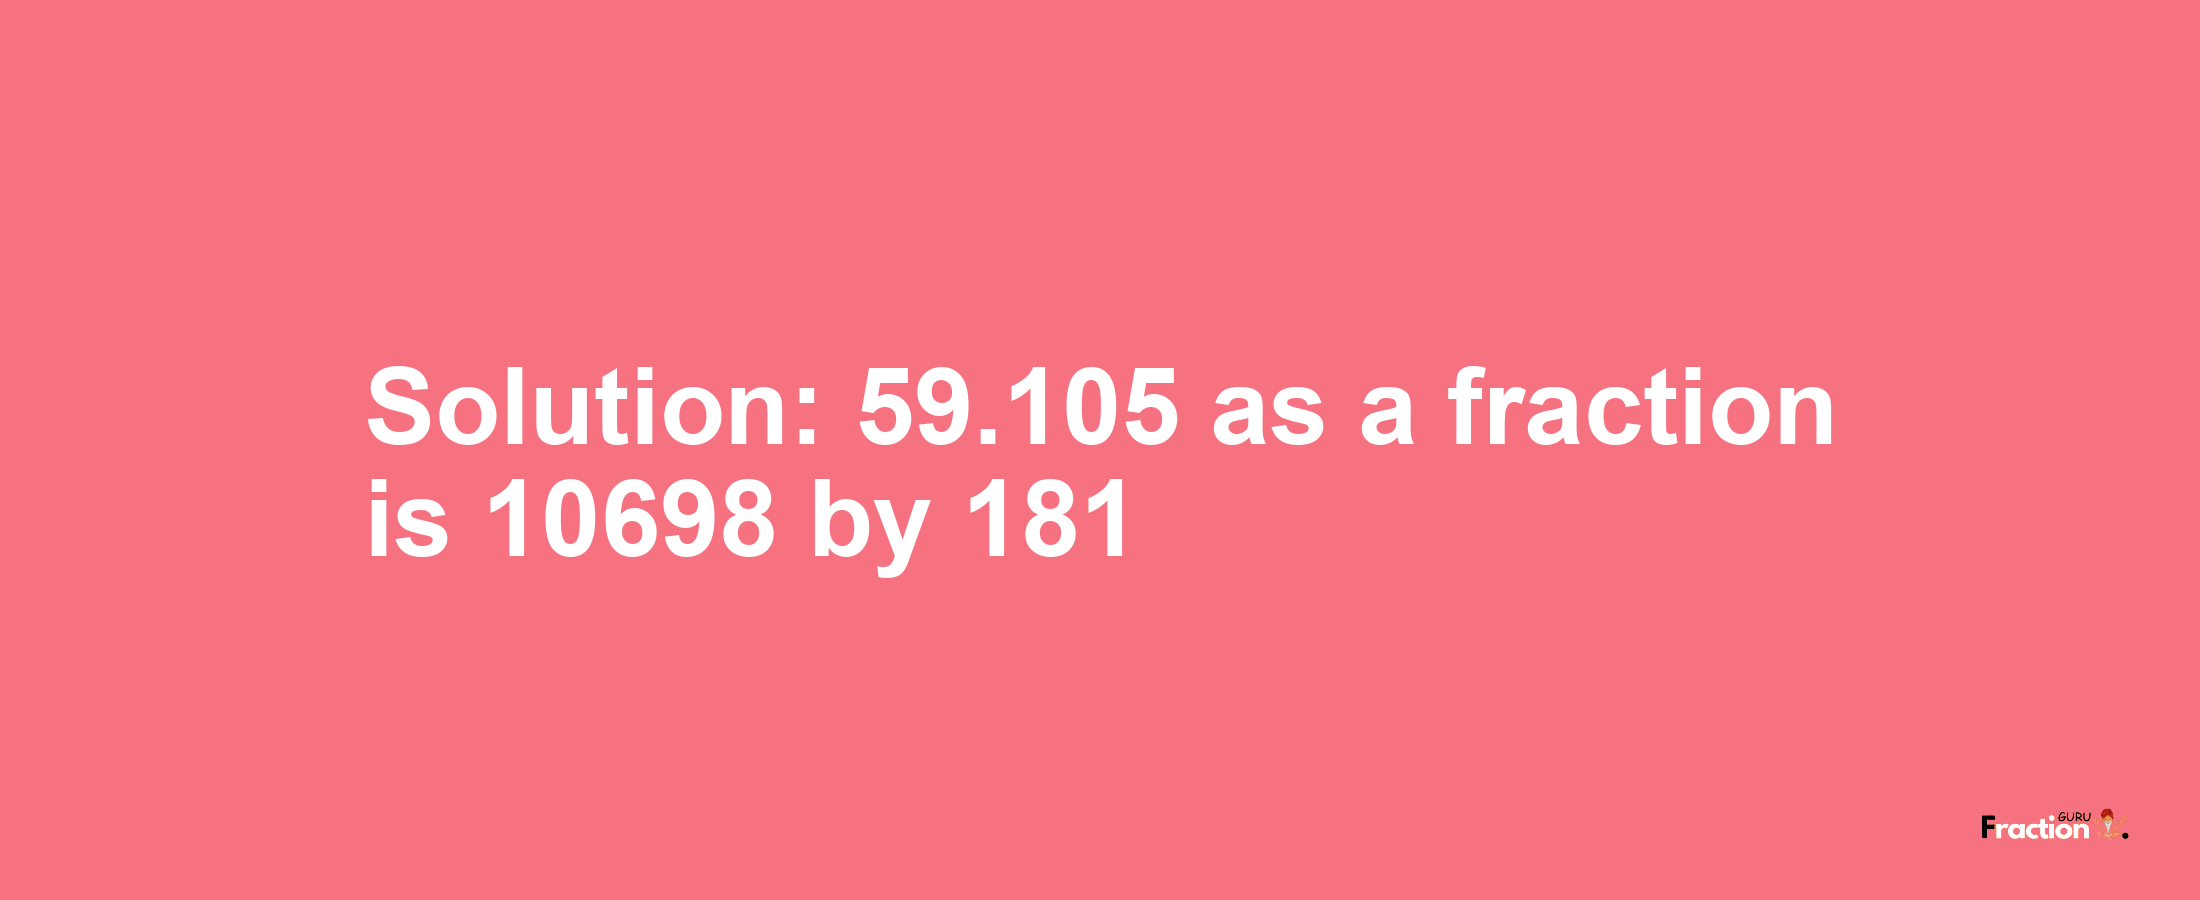 Solution:59.105 as a fraction is 10698/181